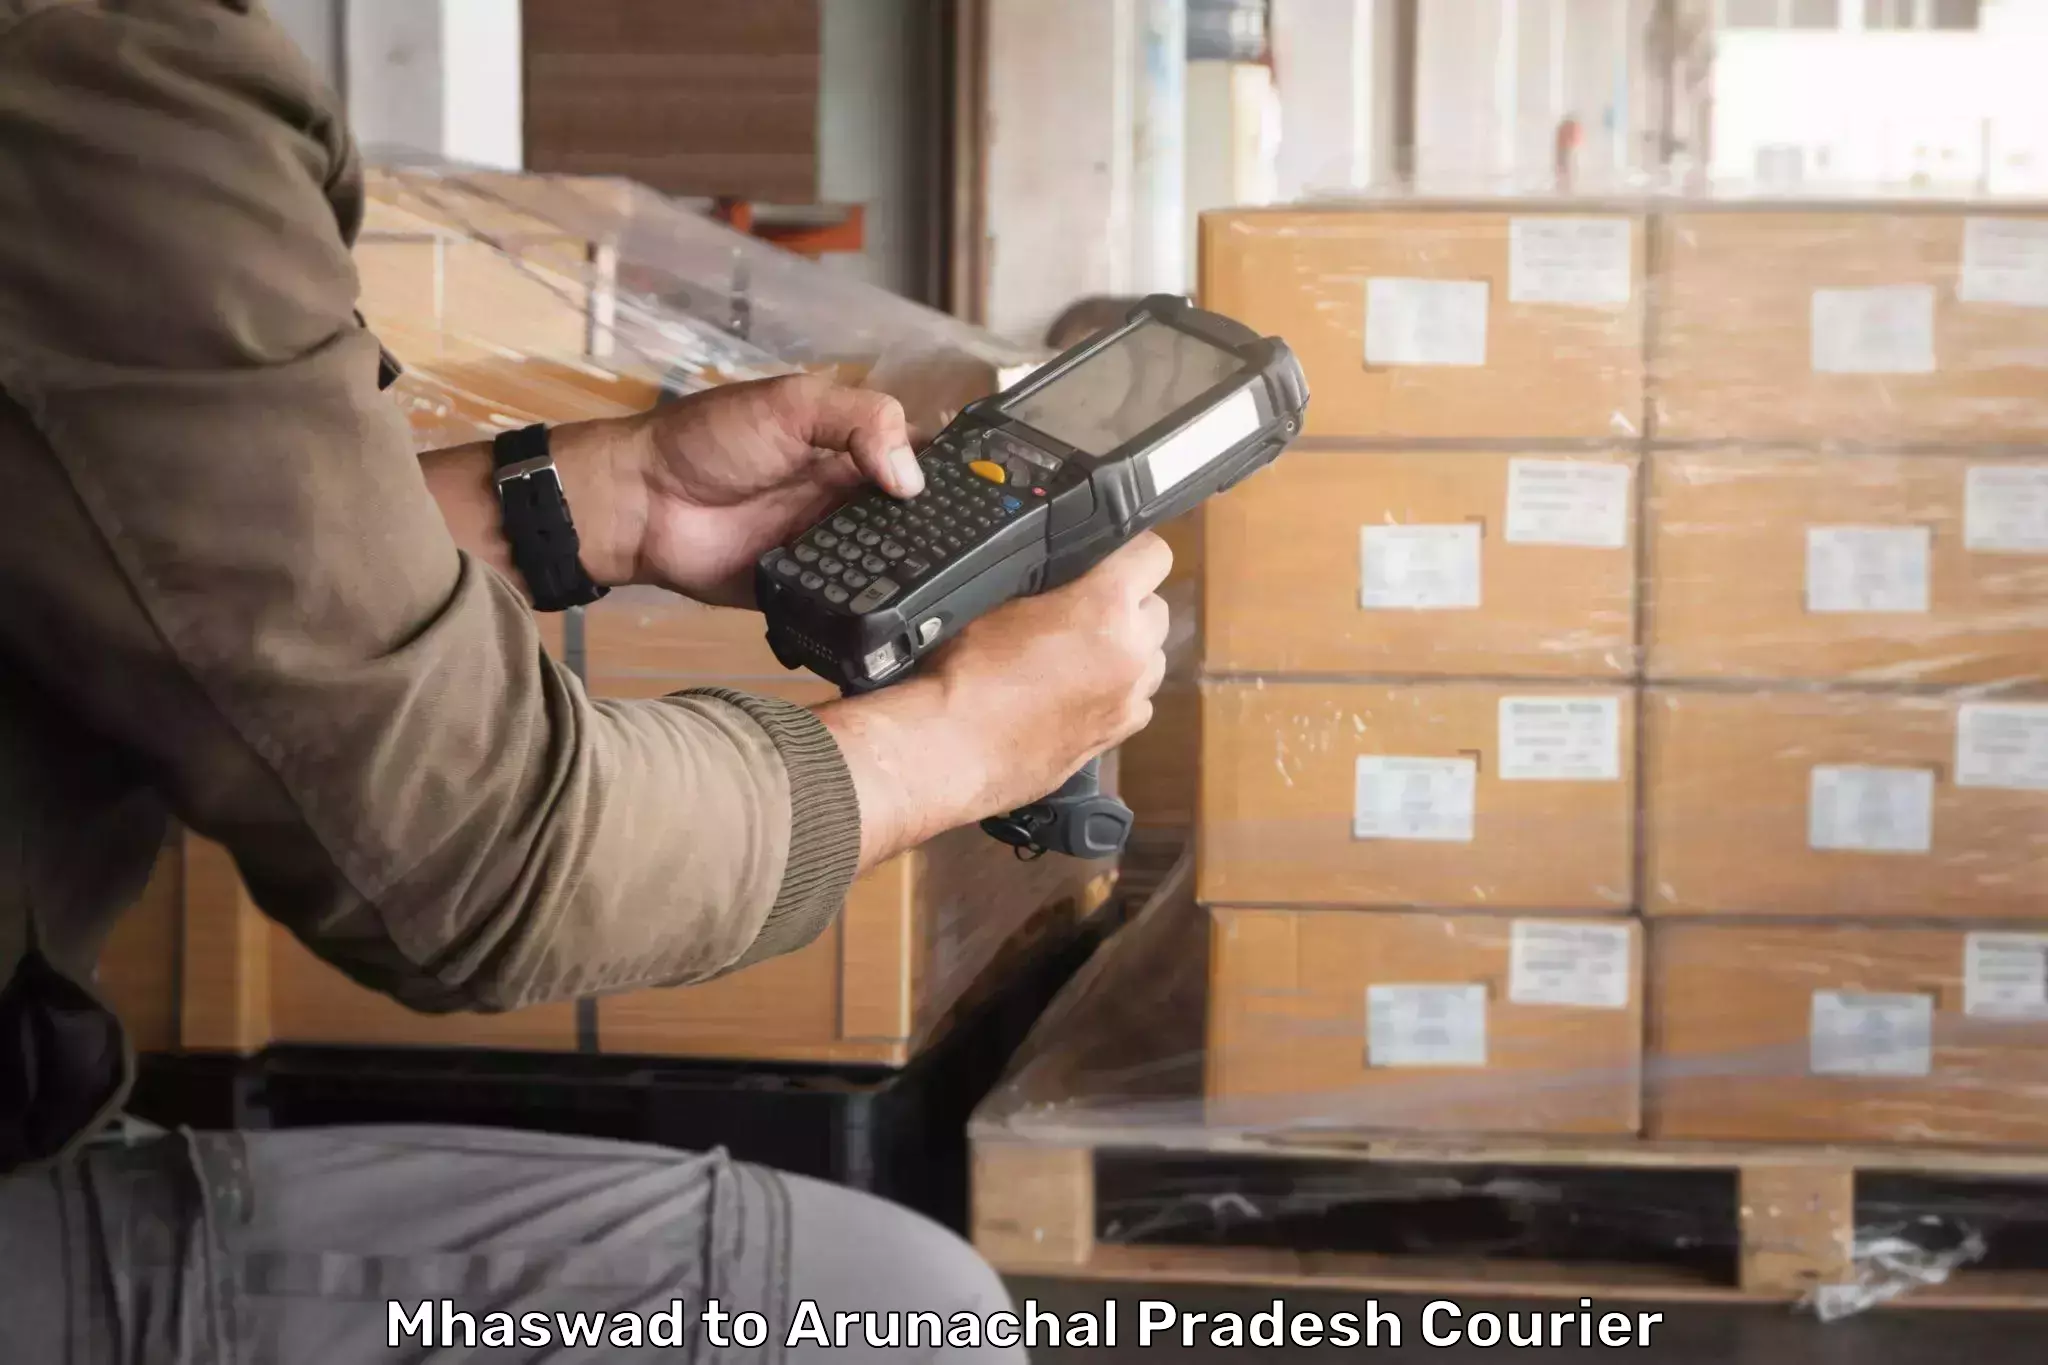 State-of-the-art courier technology Mhaswad to Pasighat